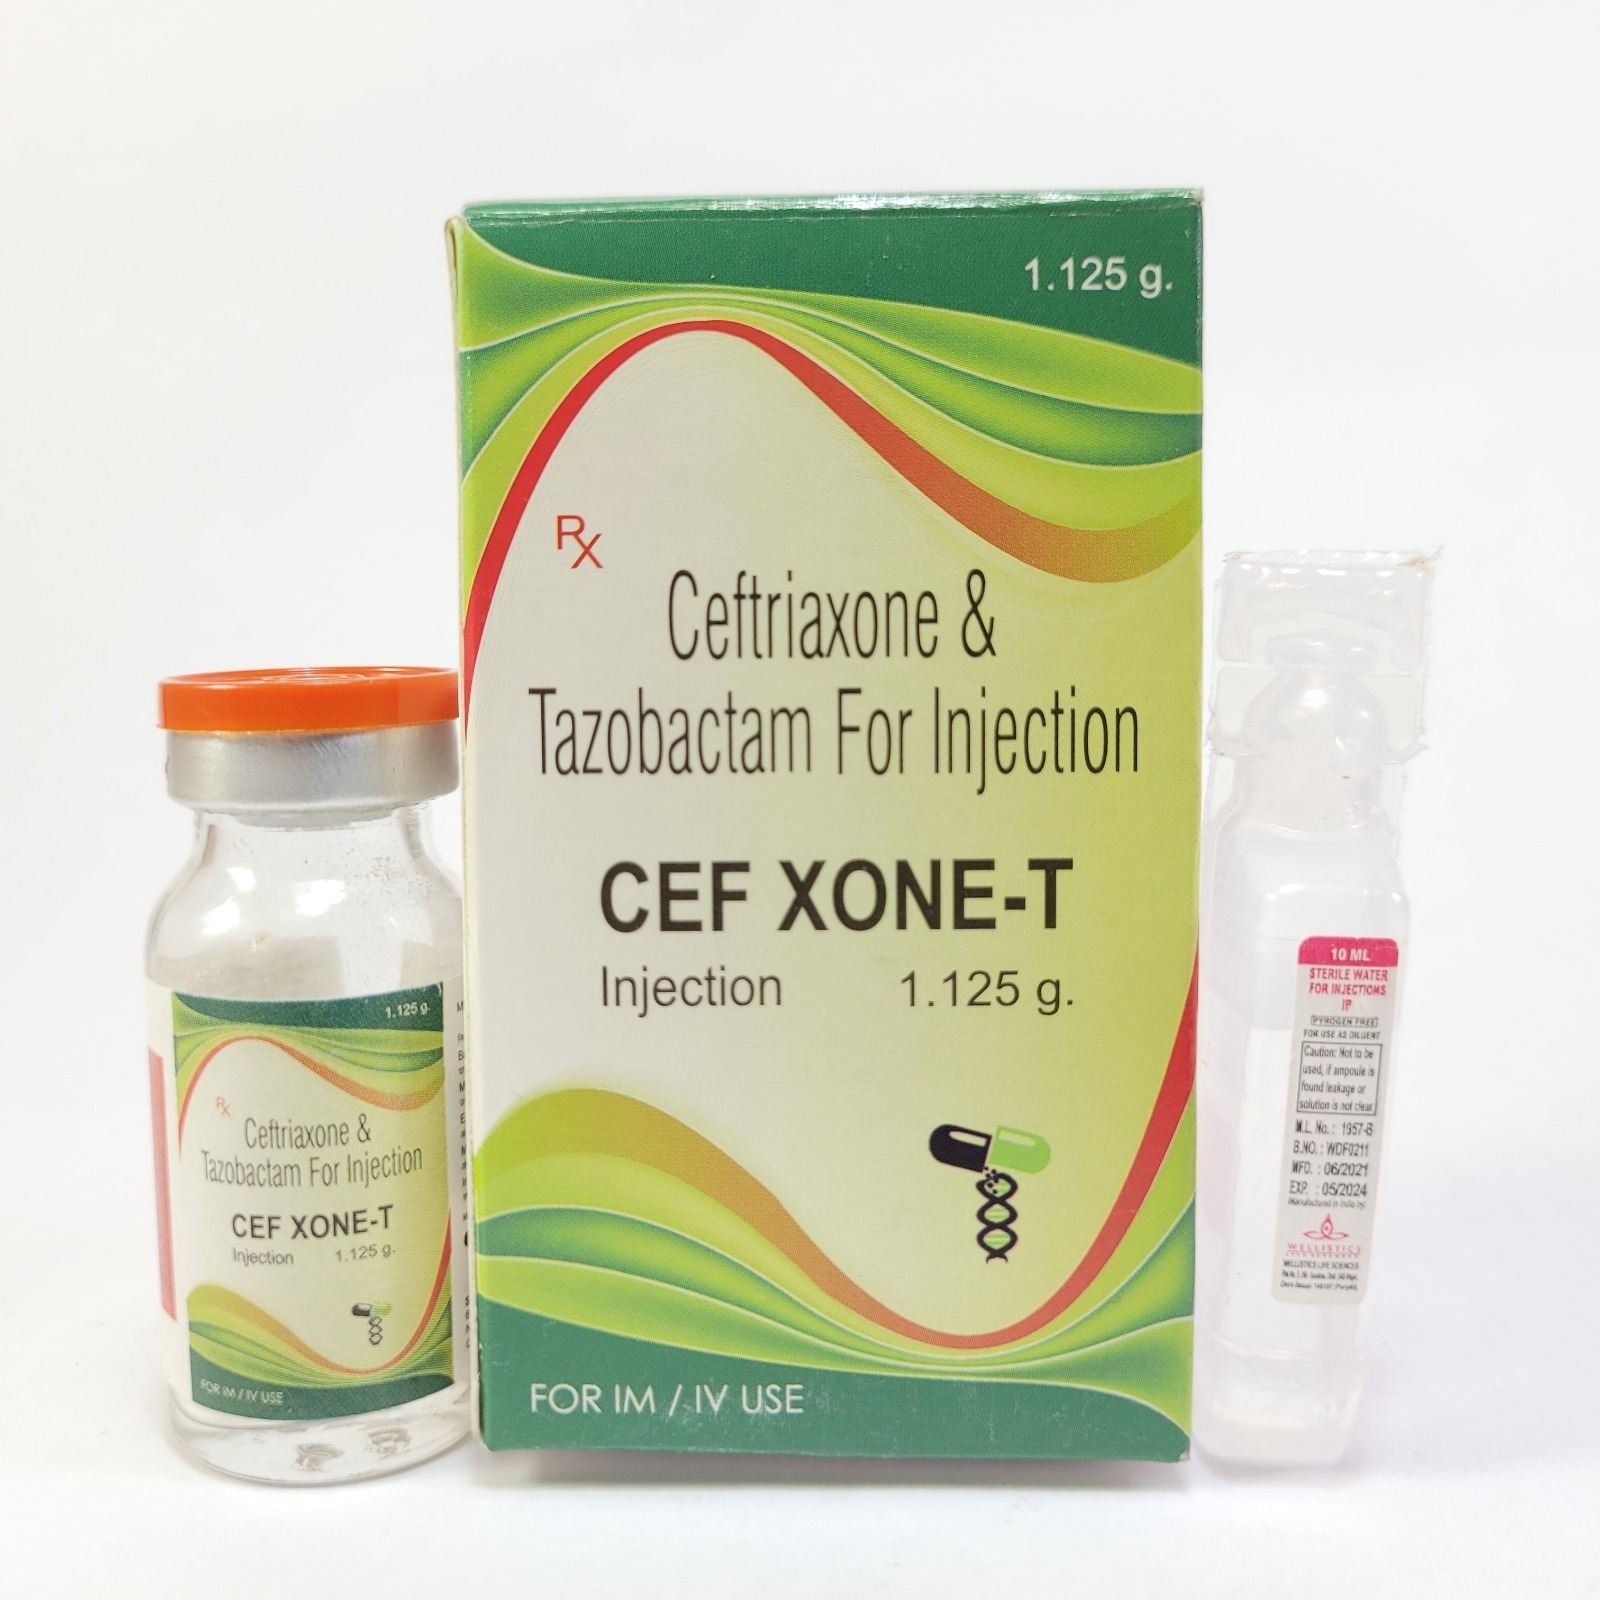 Ceftriaxone Tazobactam for Injection